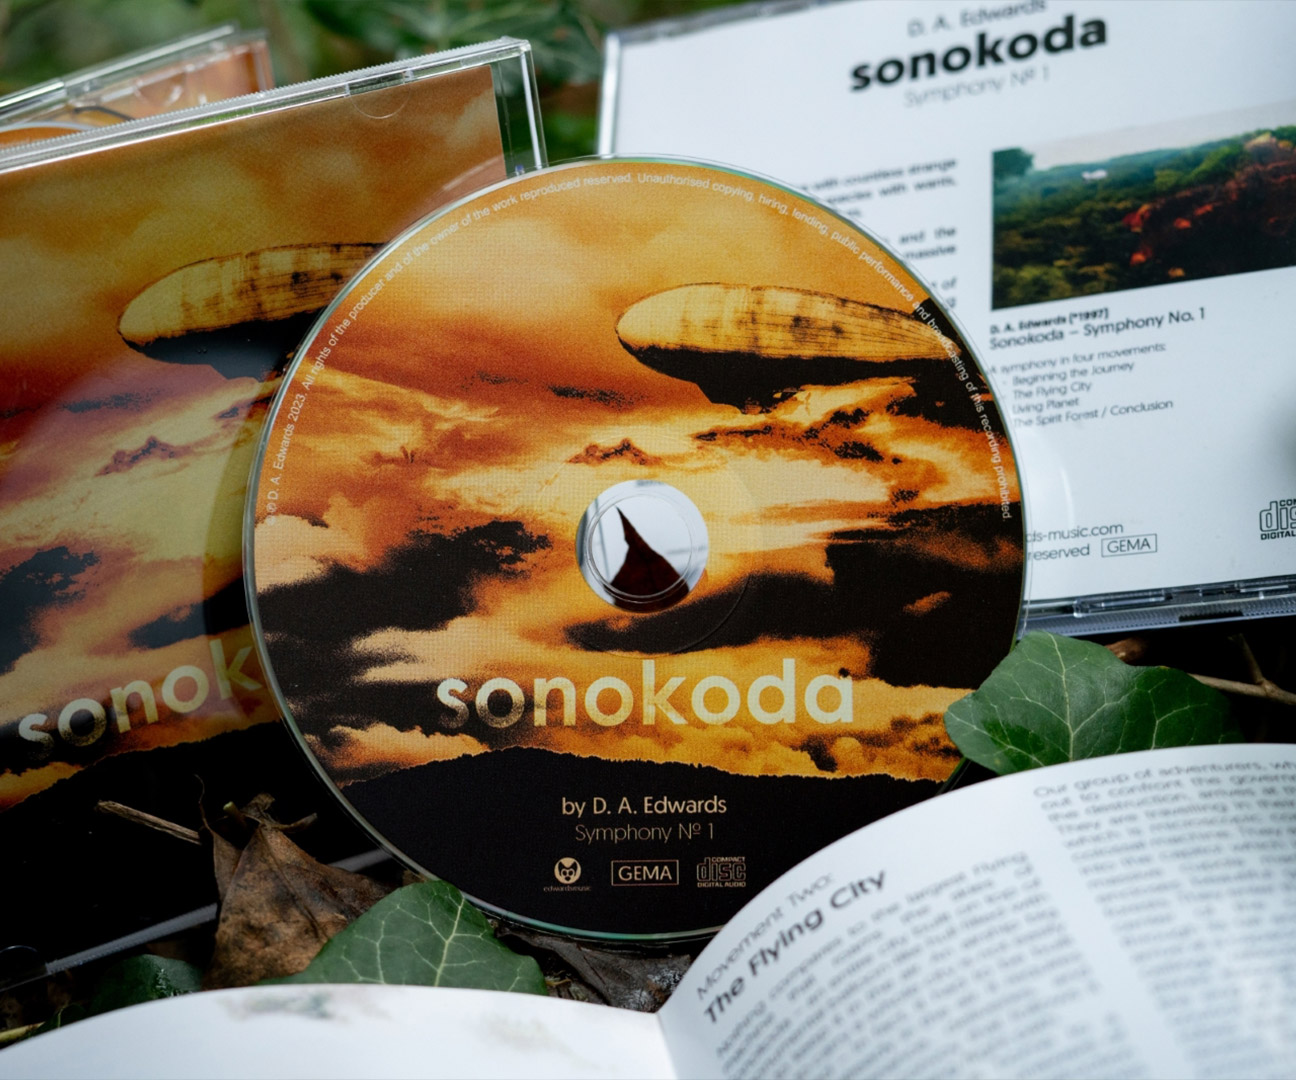 Experience Sonokoda in the highest quality with uncompressed 16 bit audio at a sample rate of 44.1 kHz